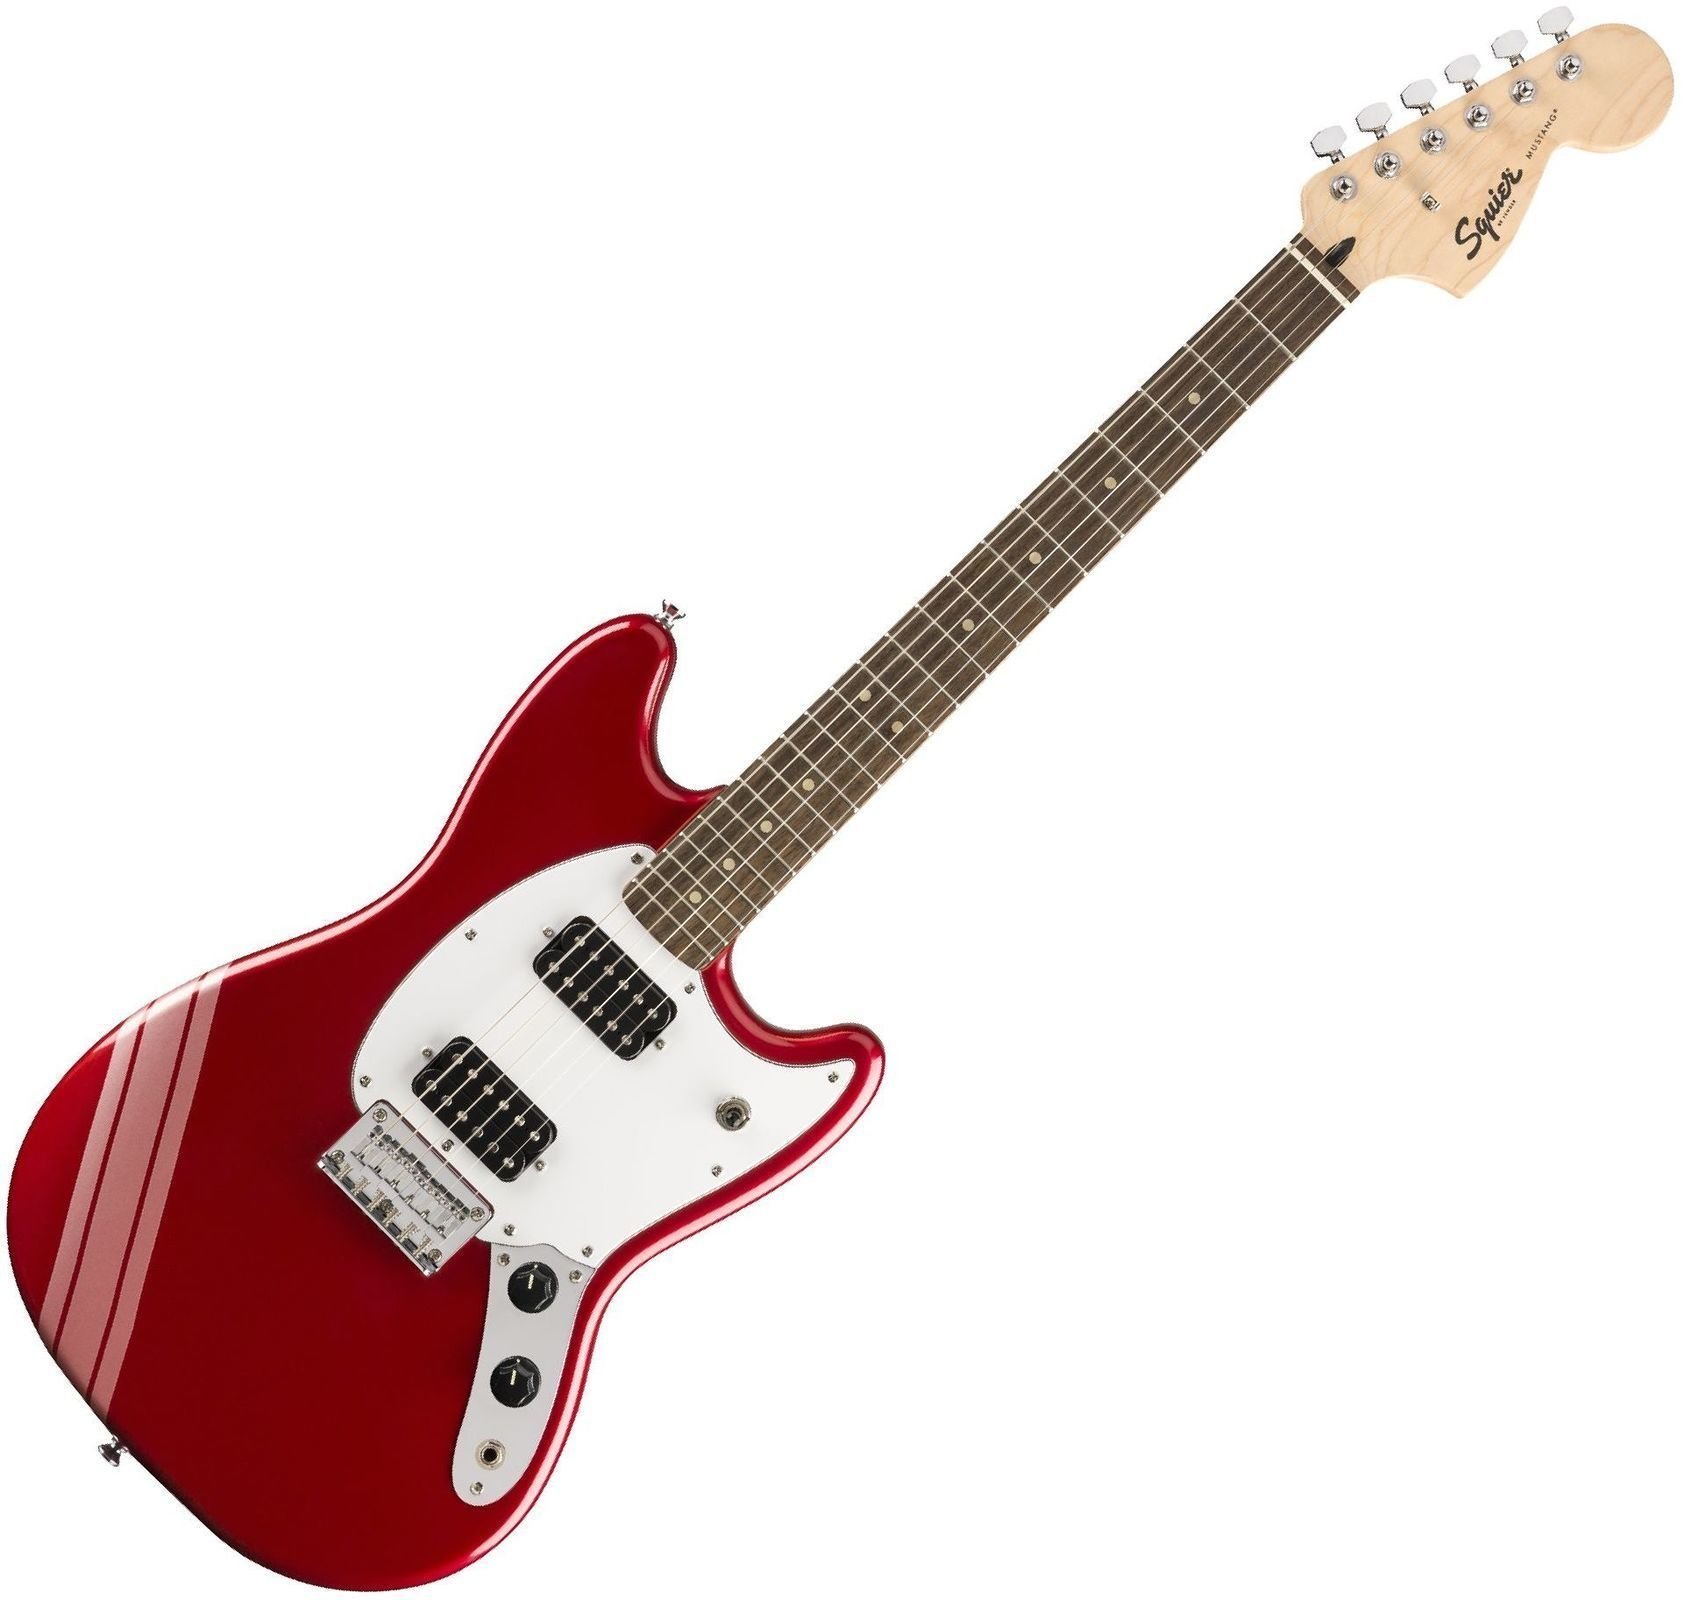 Sähkökitara Fender Squier FSR Bullet Competition Mustang HH IL Candy Apple Red